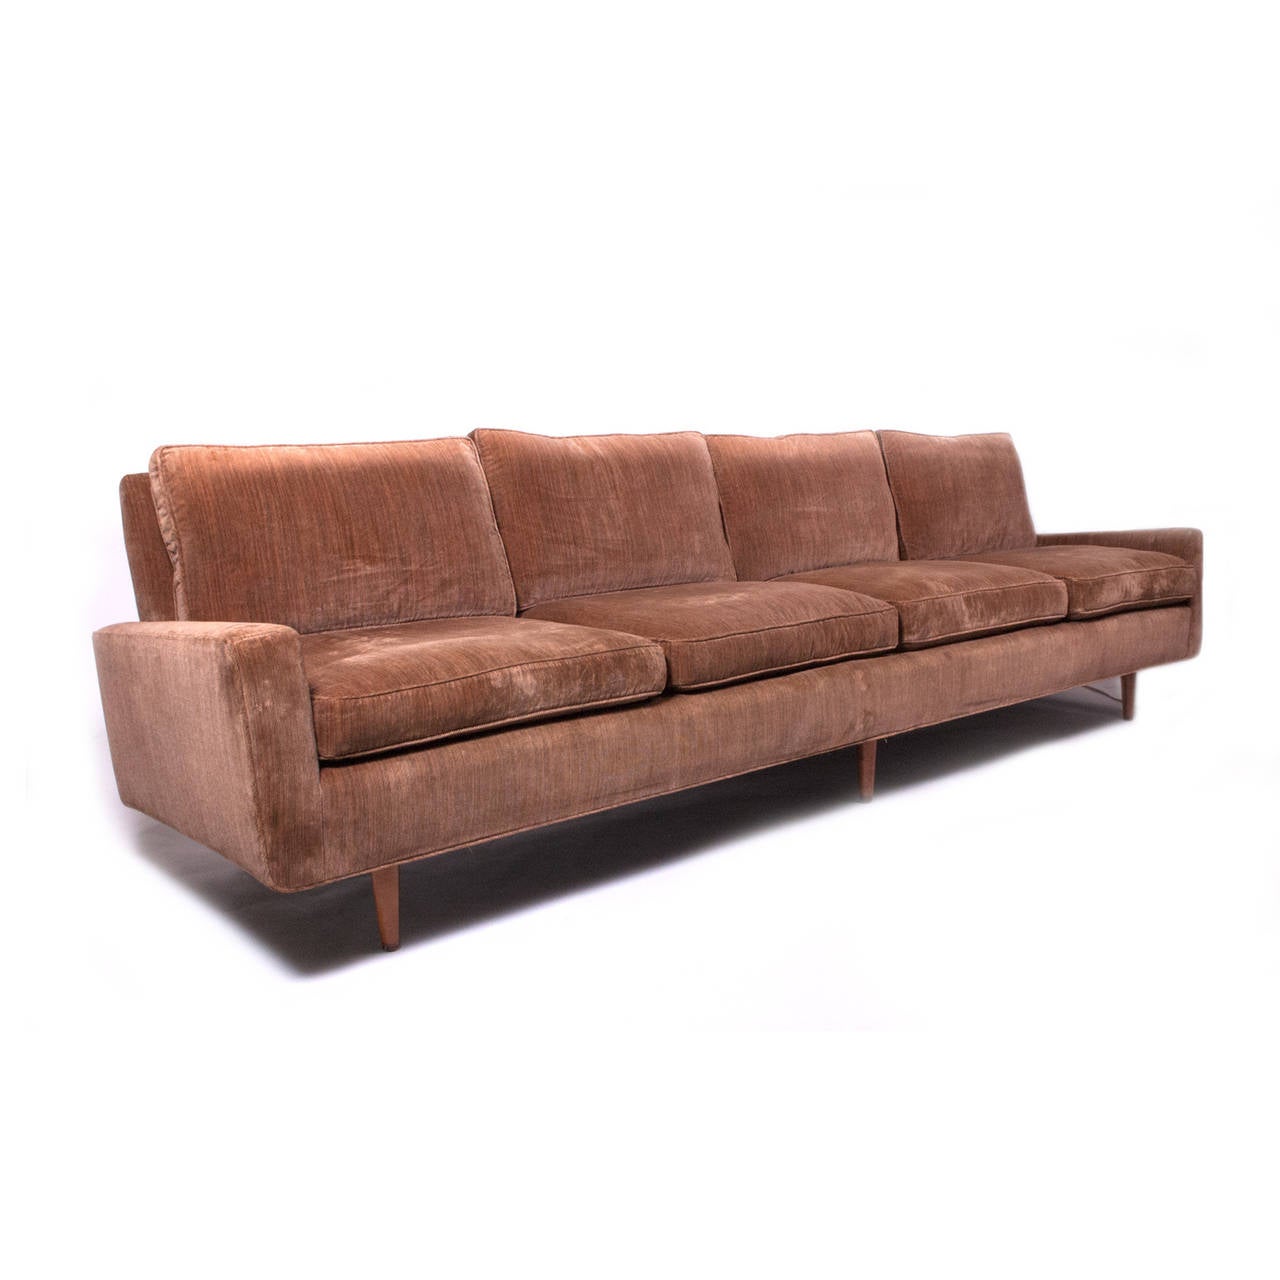 Custom size four-seat sofa on tapered stained birch cone legs. Down cushions. Upholstered in velour. Retains dated label from feather company and model number. Made by Knoll Associates.